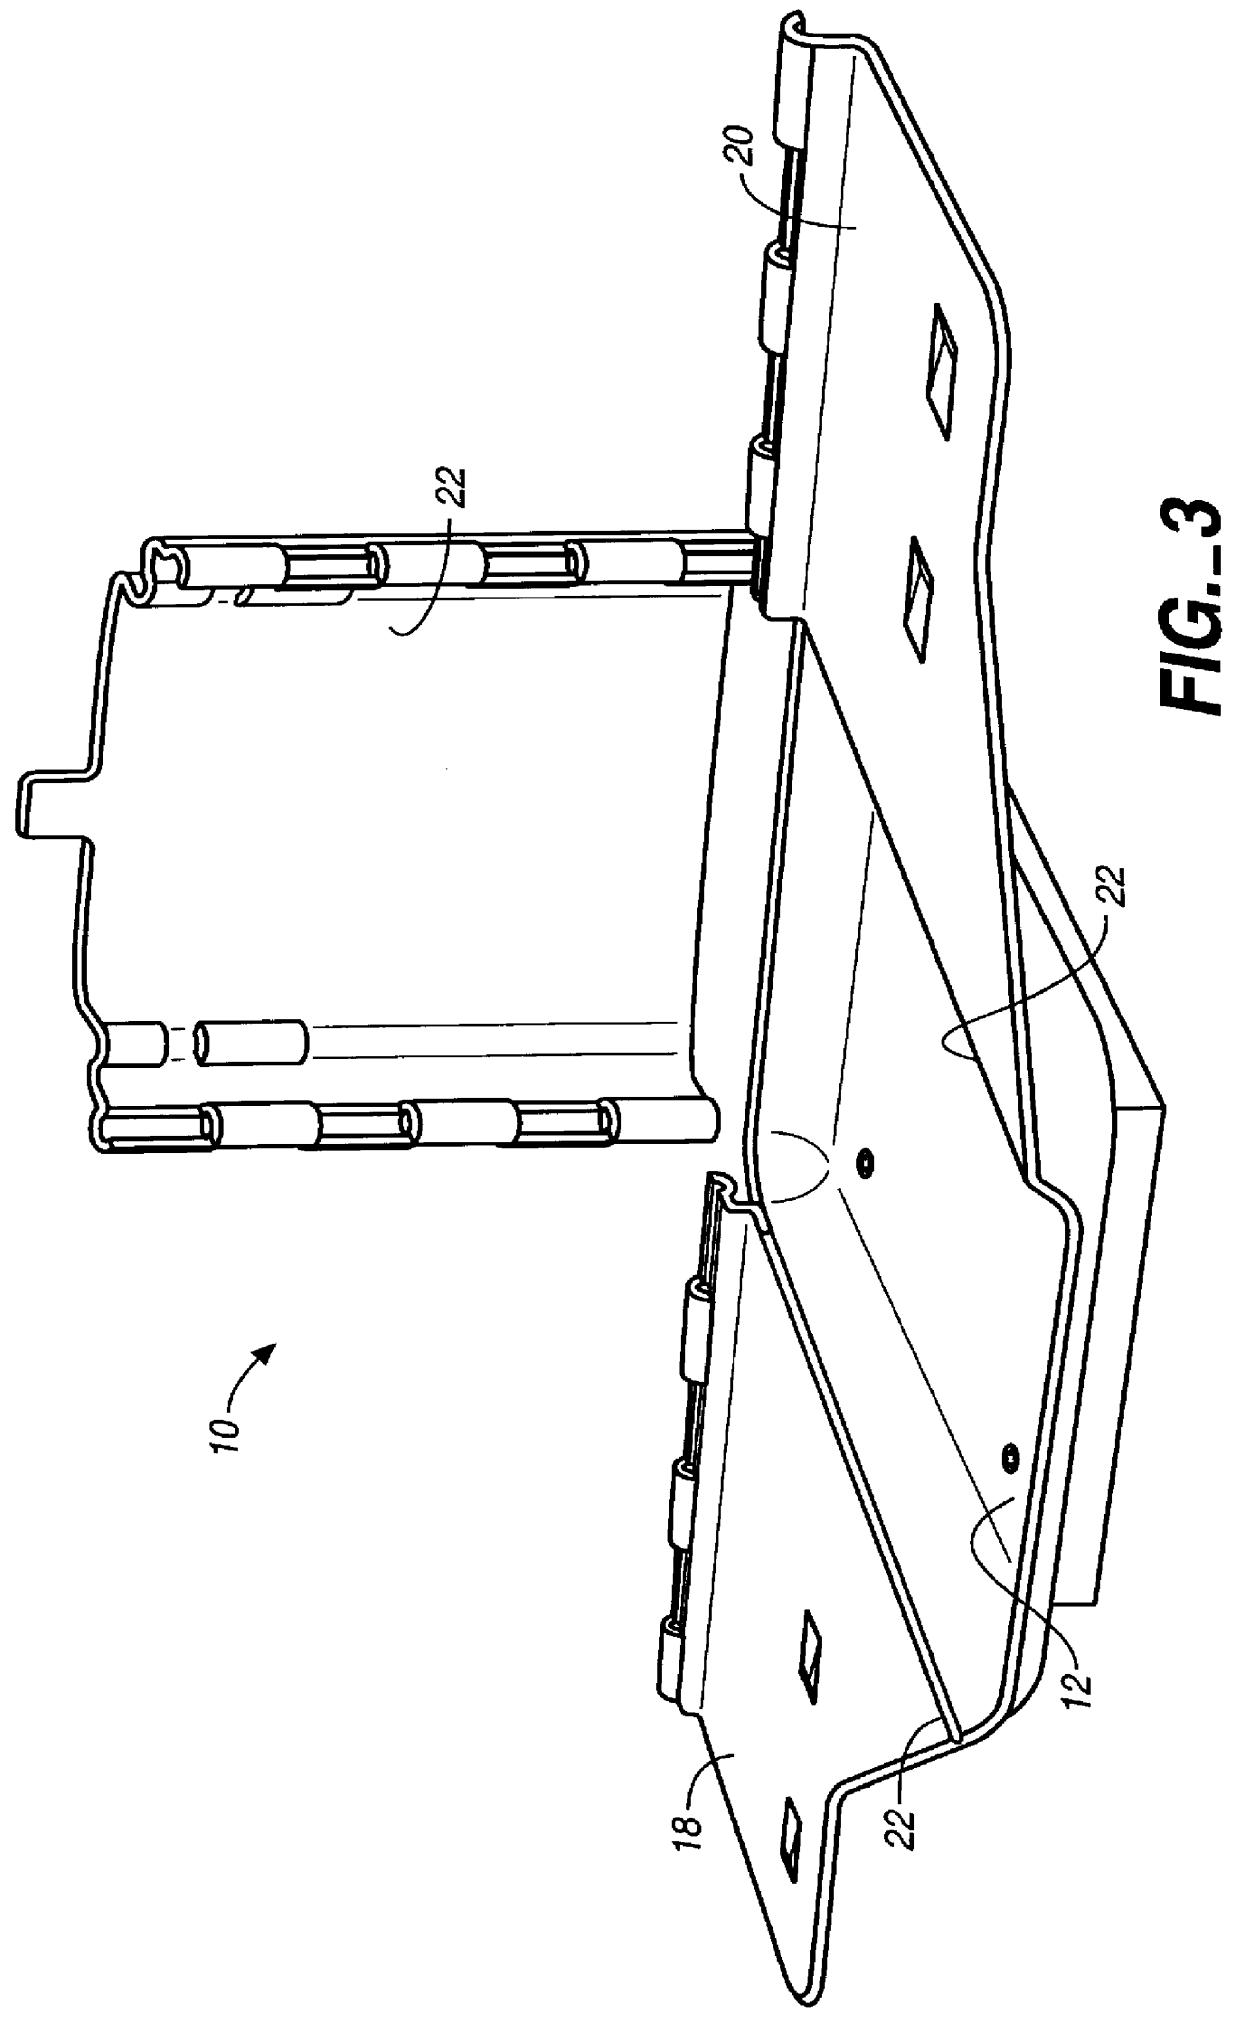 T-shirt bag rack with cantilevered bag support arms and method